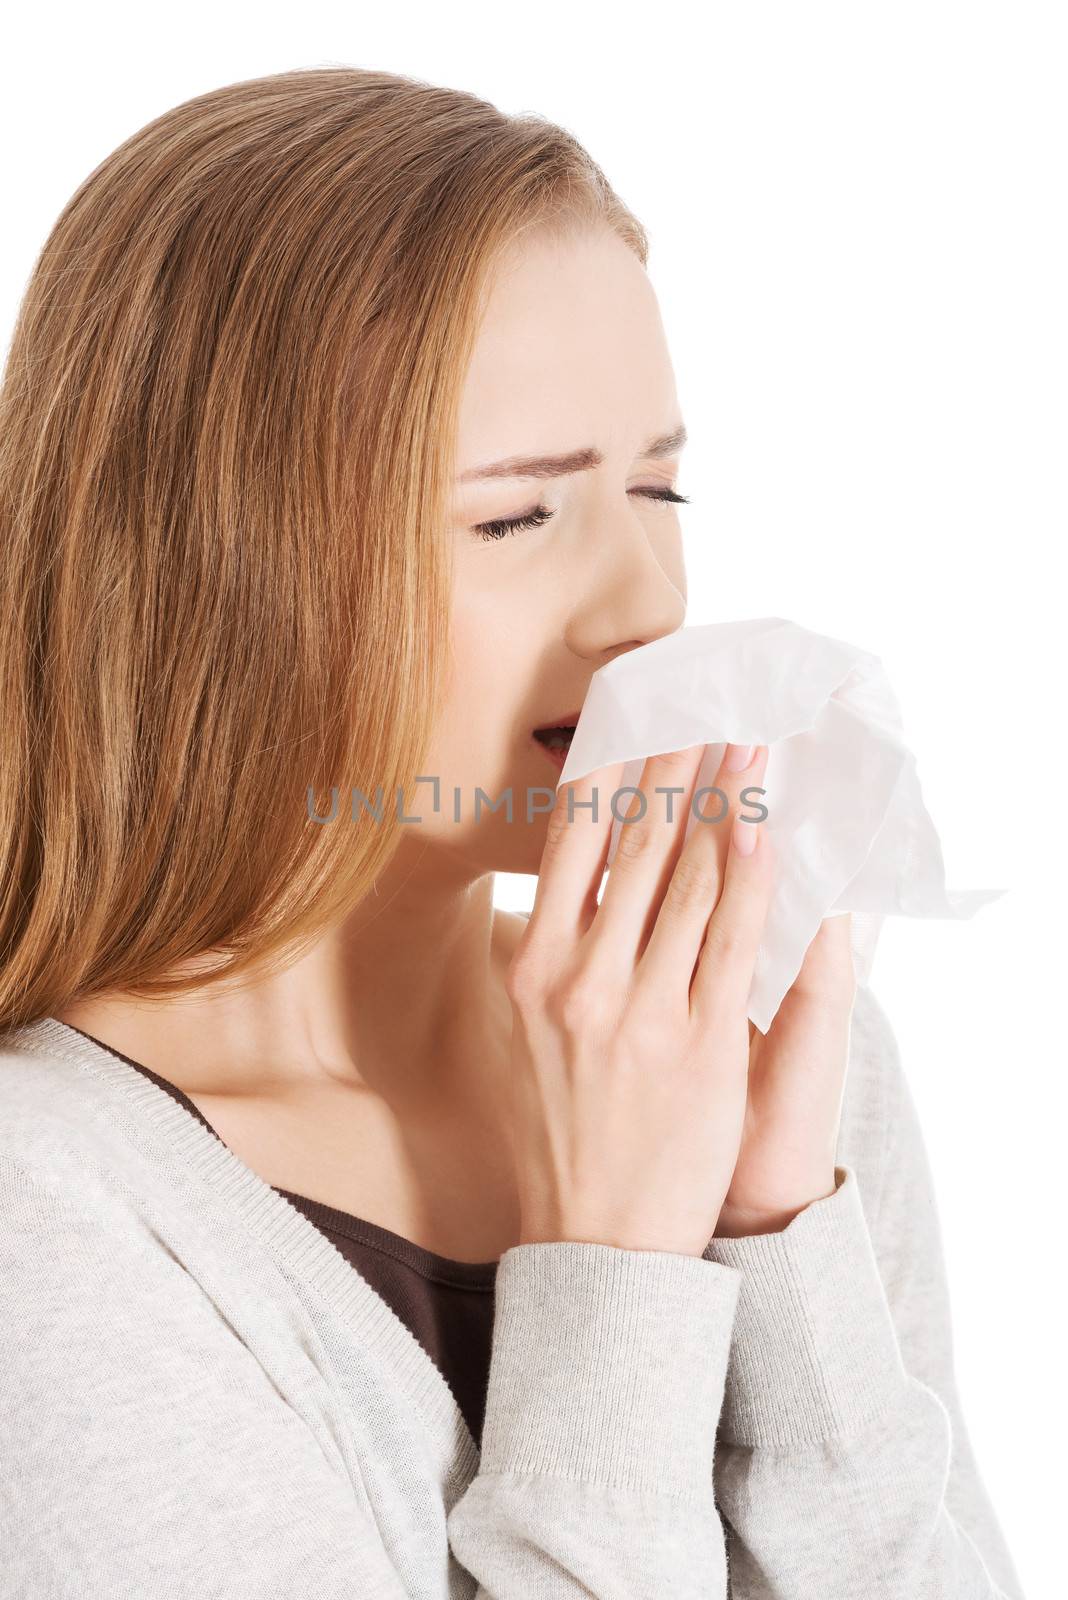 Beautiful woman sneezing, holding a tissue. Isolated on white.